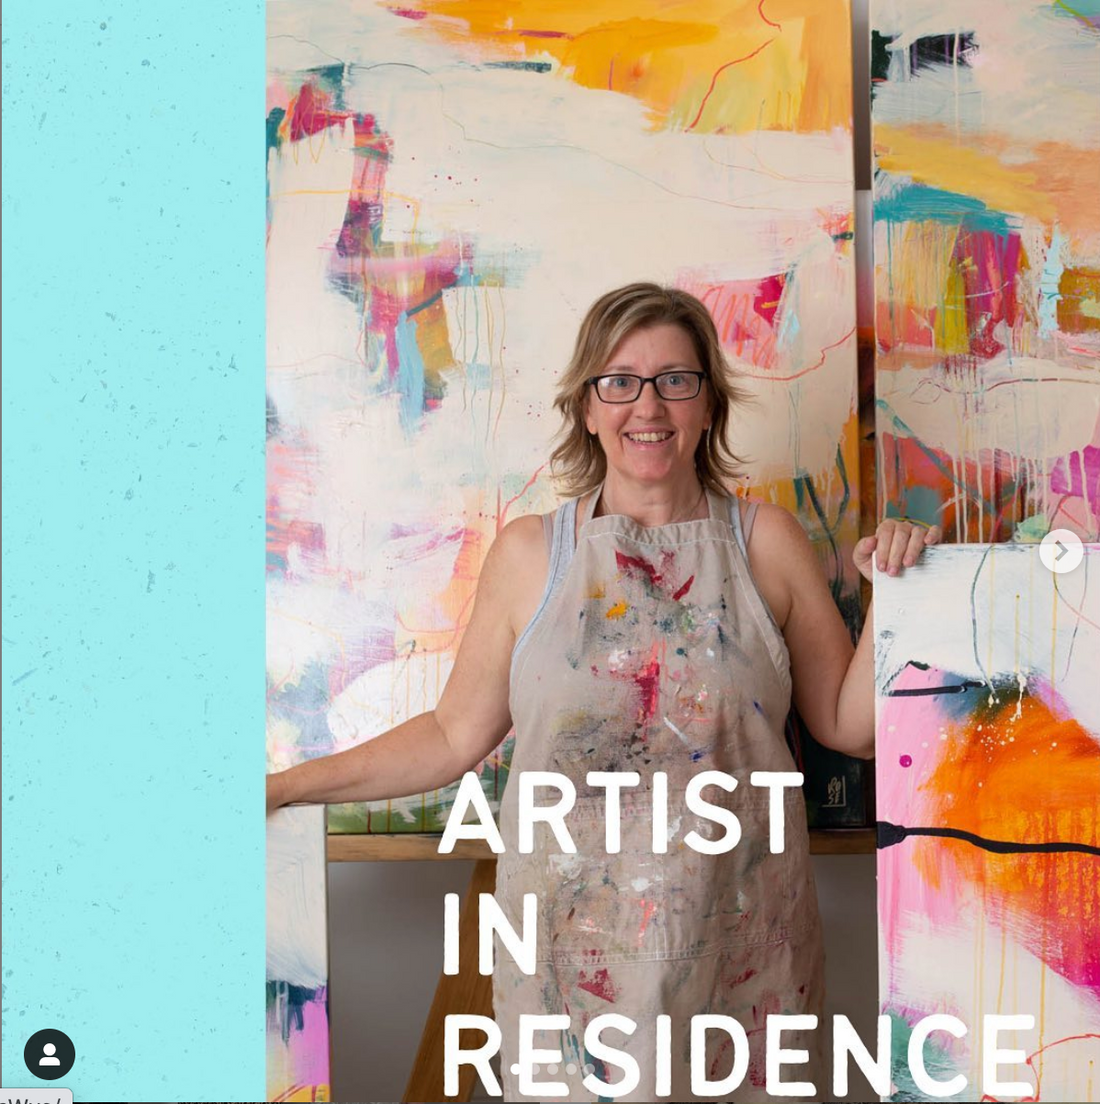 What I learnt from participating in my first Artist in Residence Program